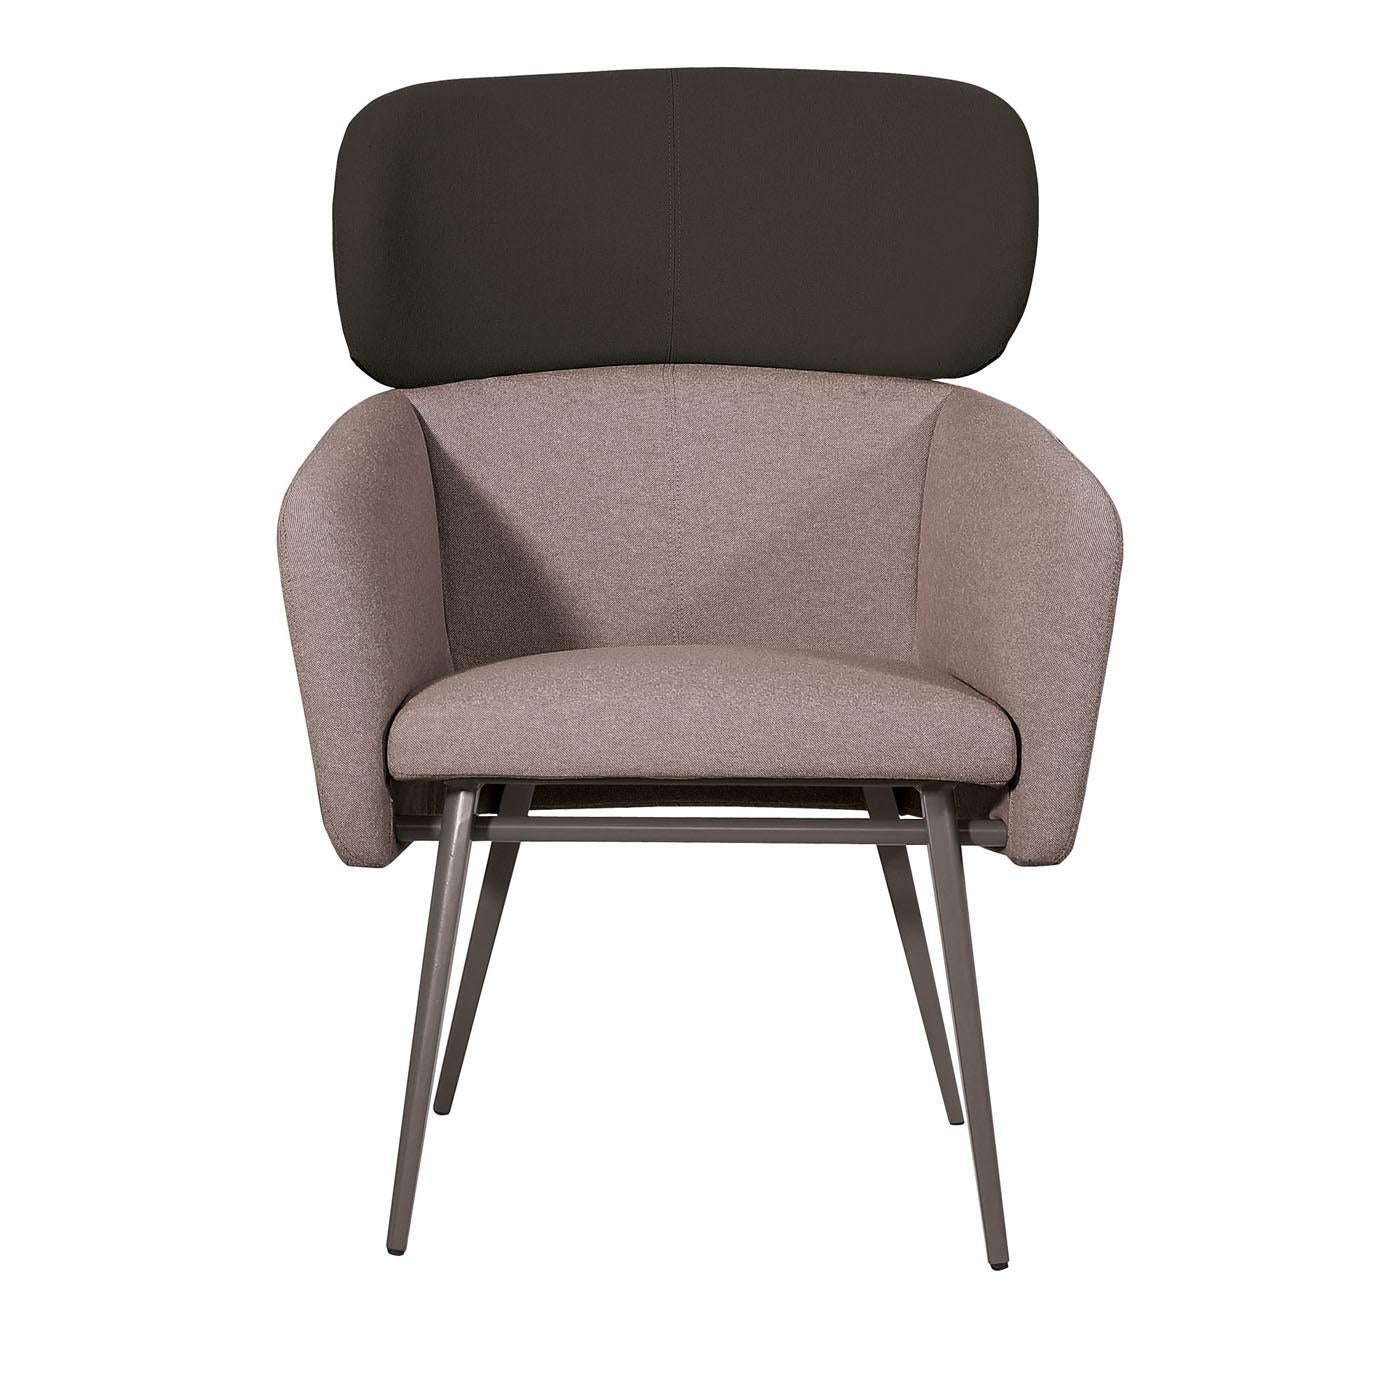 A combination of elegance and functionality, this chair exudes comfort thanks to its soft and embracing seat. It features a slim black-lacquered beechwood structure with slanted legs and a simple yet extremely comfortable seat padded with